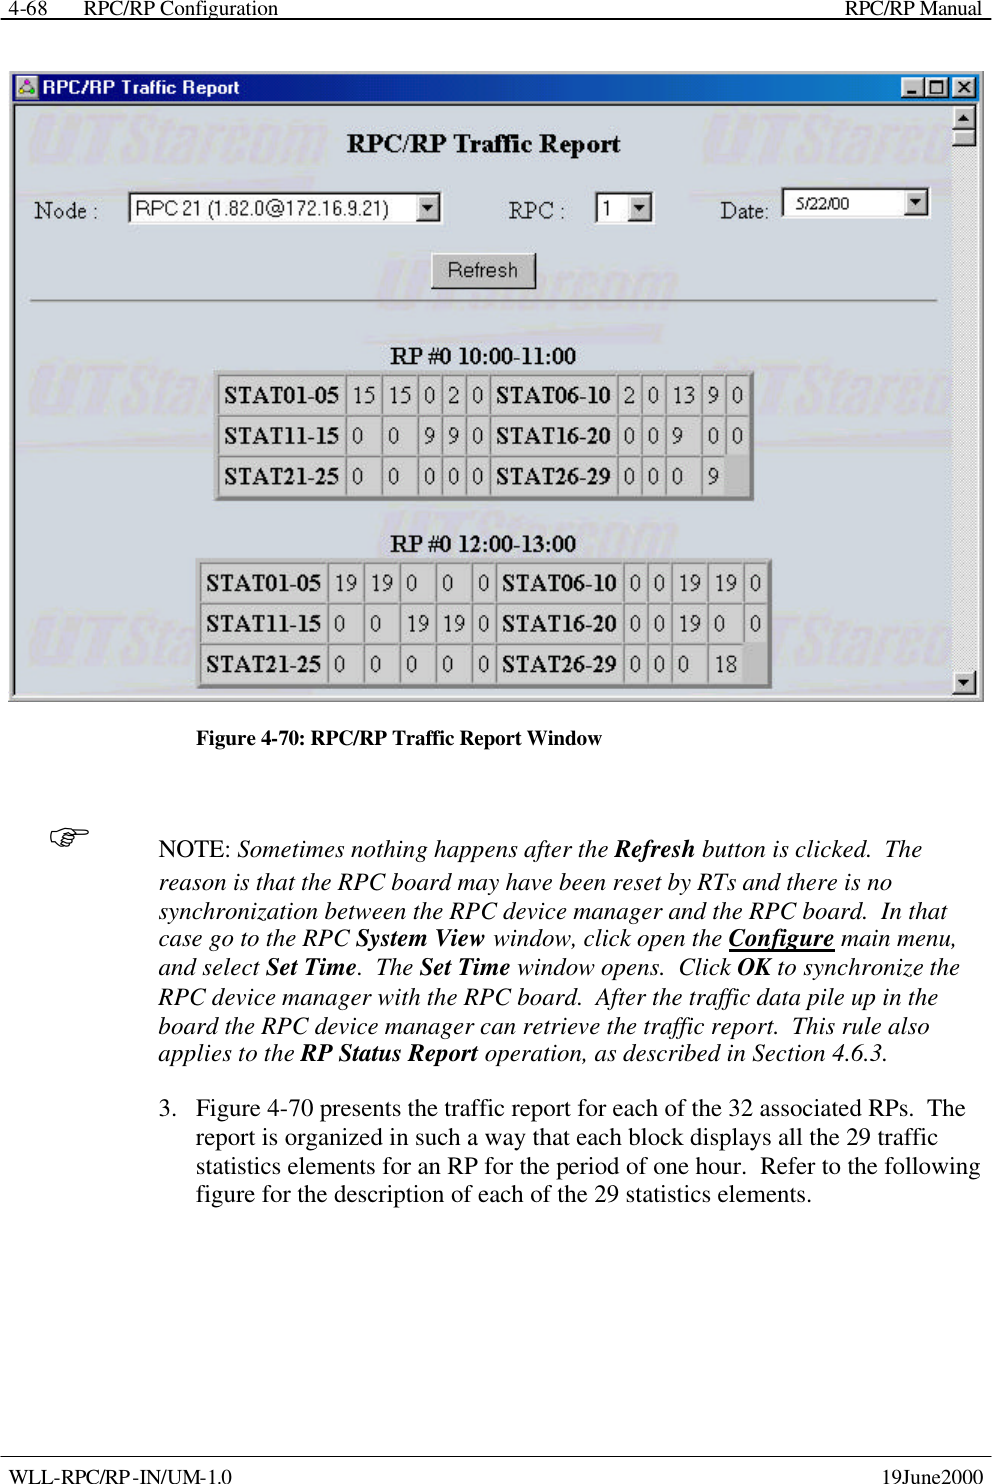  RPC/RP Configuration    RPC/RP Manual   WLL-RPC/RP-IN/UM-1.0    19June2000 4-68 Figure 4-70: RPC/RP Traffic Report Window F NOTE: Sometimes nothing happens after the Refresh button is clicked.  The reason is that the RPC board may have been reset by RTs and there is no synchronization between the RPC device manager and the RPC board.  In that case go to the RPC System View window, click open the Configure main menu, and select Set Time.  The Set Time window opens.  Click OK to synchronize the RPC device manager with the RPC board.  After the traffic data pile up in the board the RPC device manager can retrieve the traffic report.  This rule also applies to the RP Status Report operation, as described in Section 4.6.3. 3.  Figure 4-70 presents the traffic report for each of the 32 associated RPs.  The report is organized in such a way that each block displays all the 29 traffic statistics elements for an RP for the period of one hour.  Refer to the following figure for the description of each of the 29 statistics elements. 